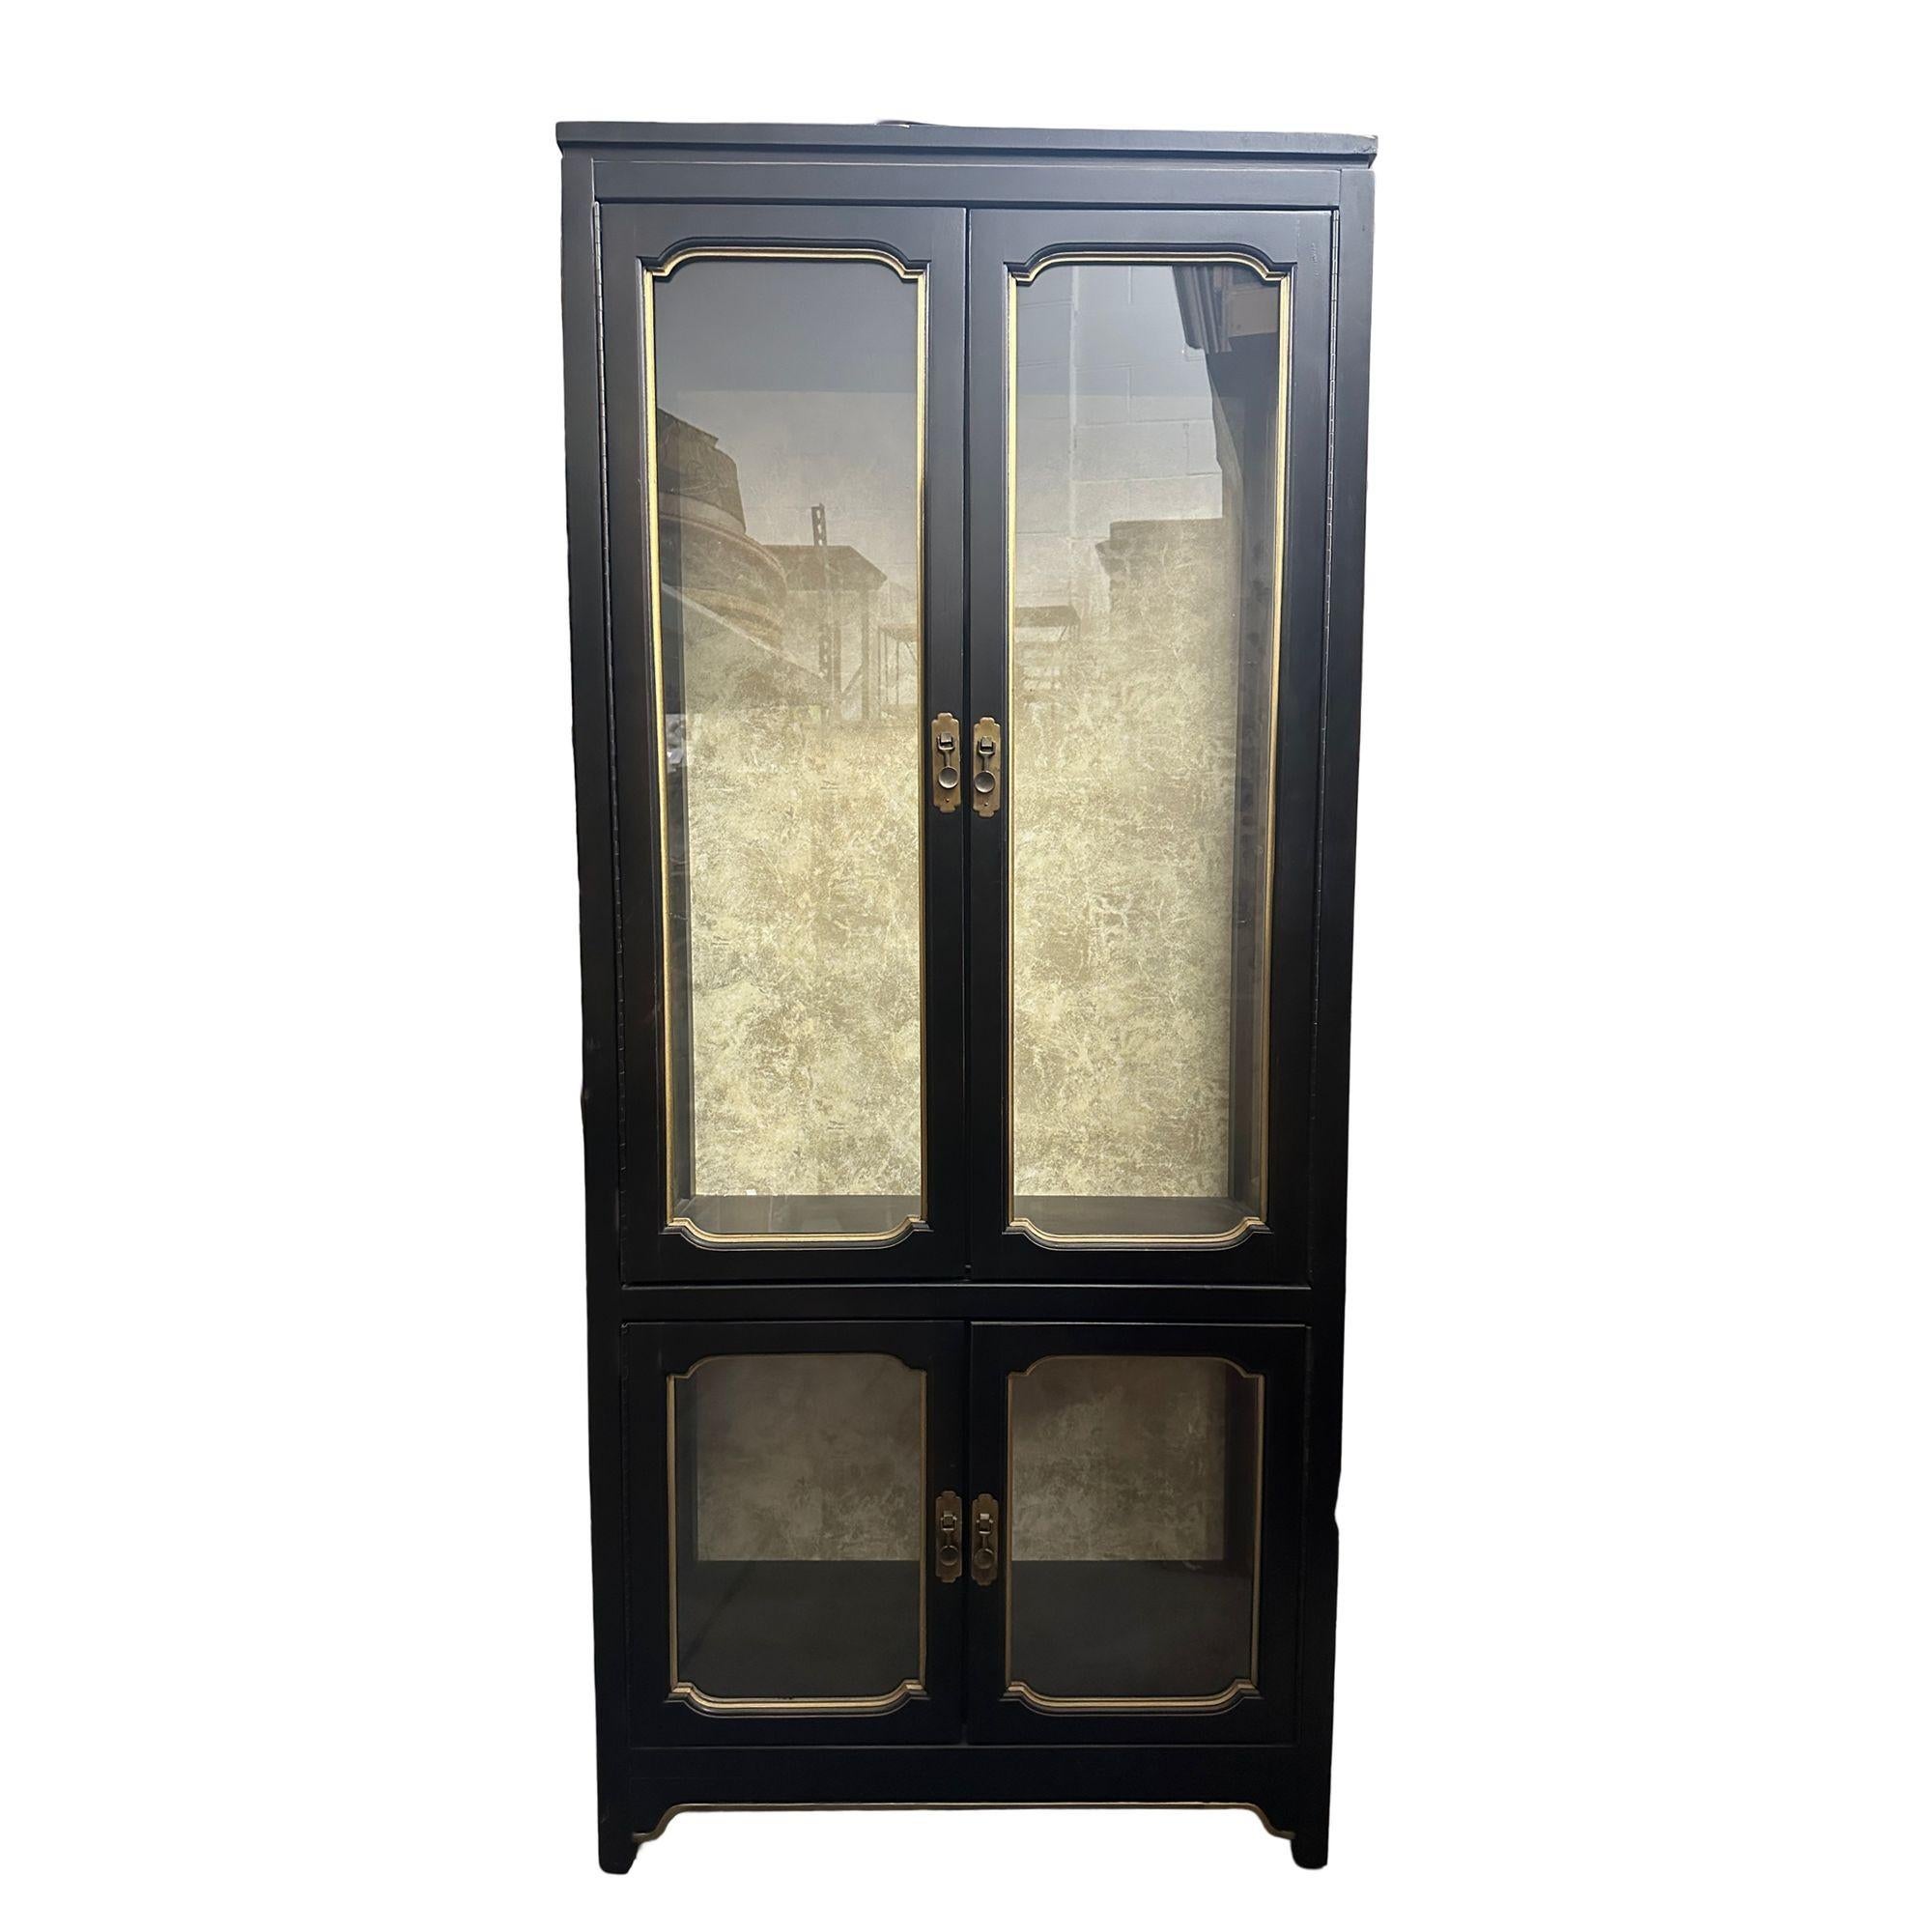 Mid 20th Century Chinoiserie Black Lacquer Lighted Curio China Display Cabinet In Excellent Condition For Sale In Van Nuys, CA